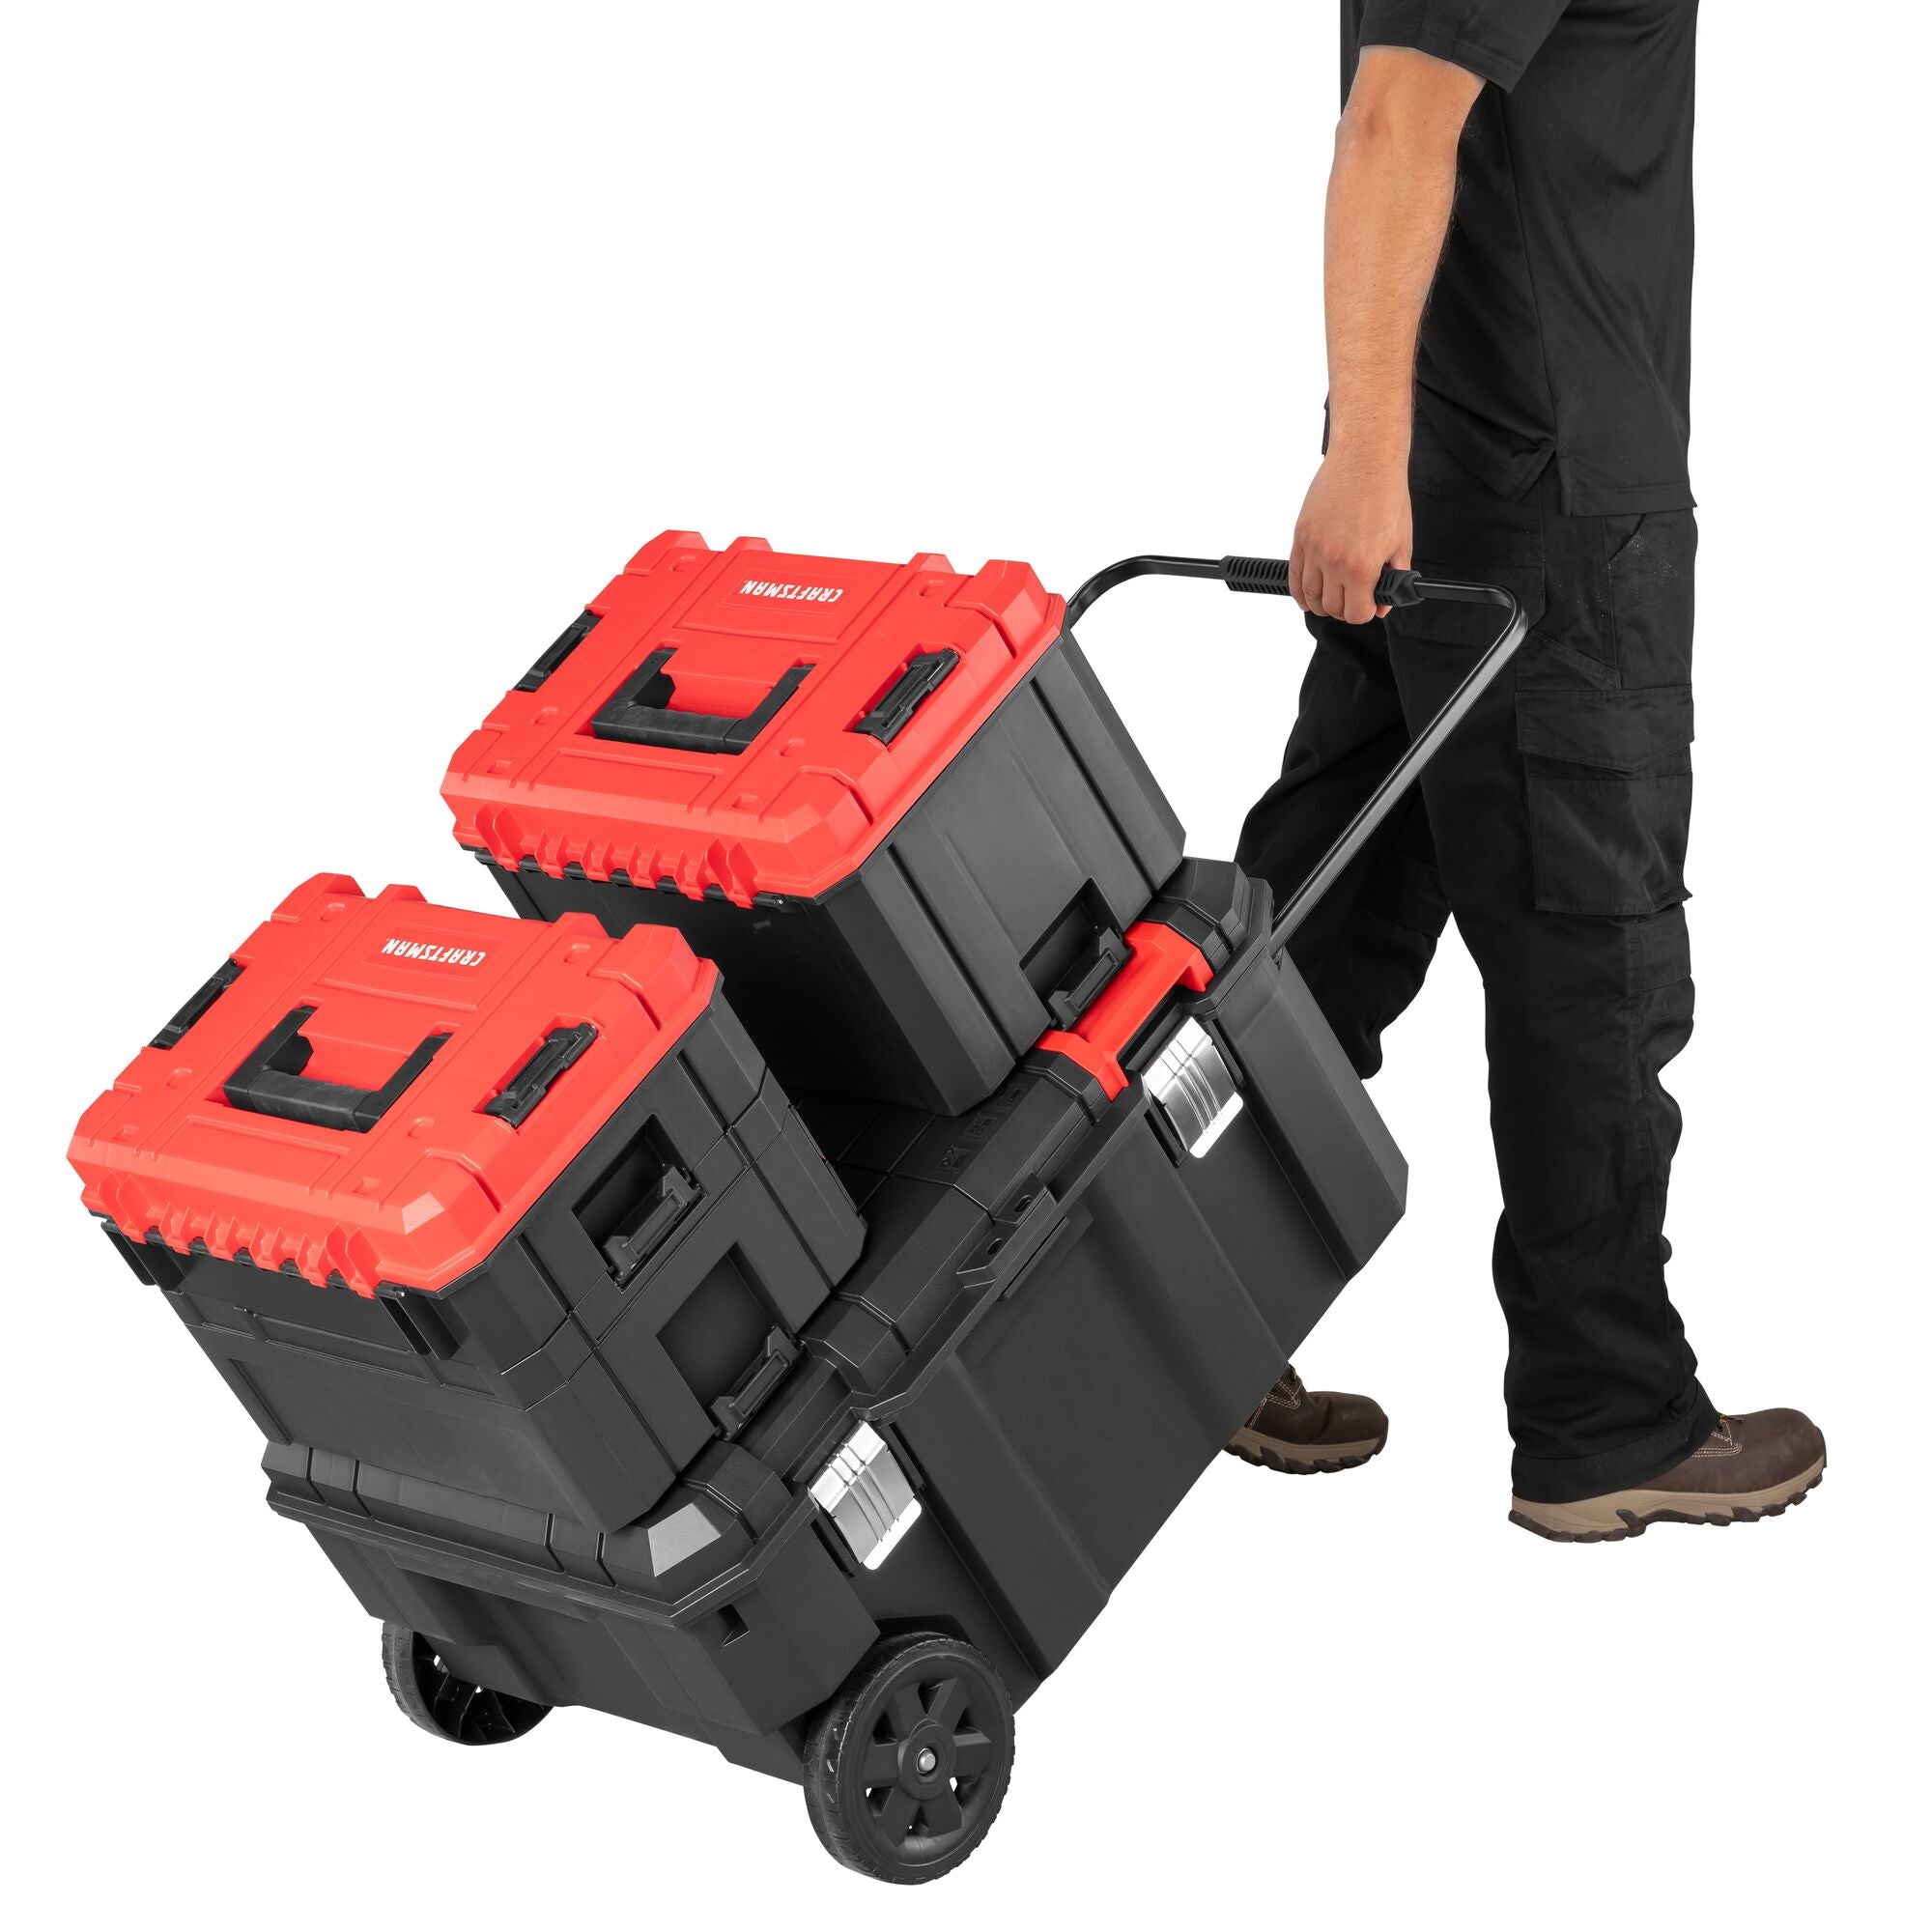 CRAFTSMAN VERSASTACK 30 Gallon Chest with additional VERSASTACK products attached being pulled by person